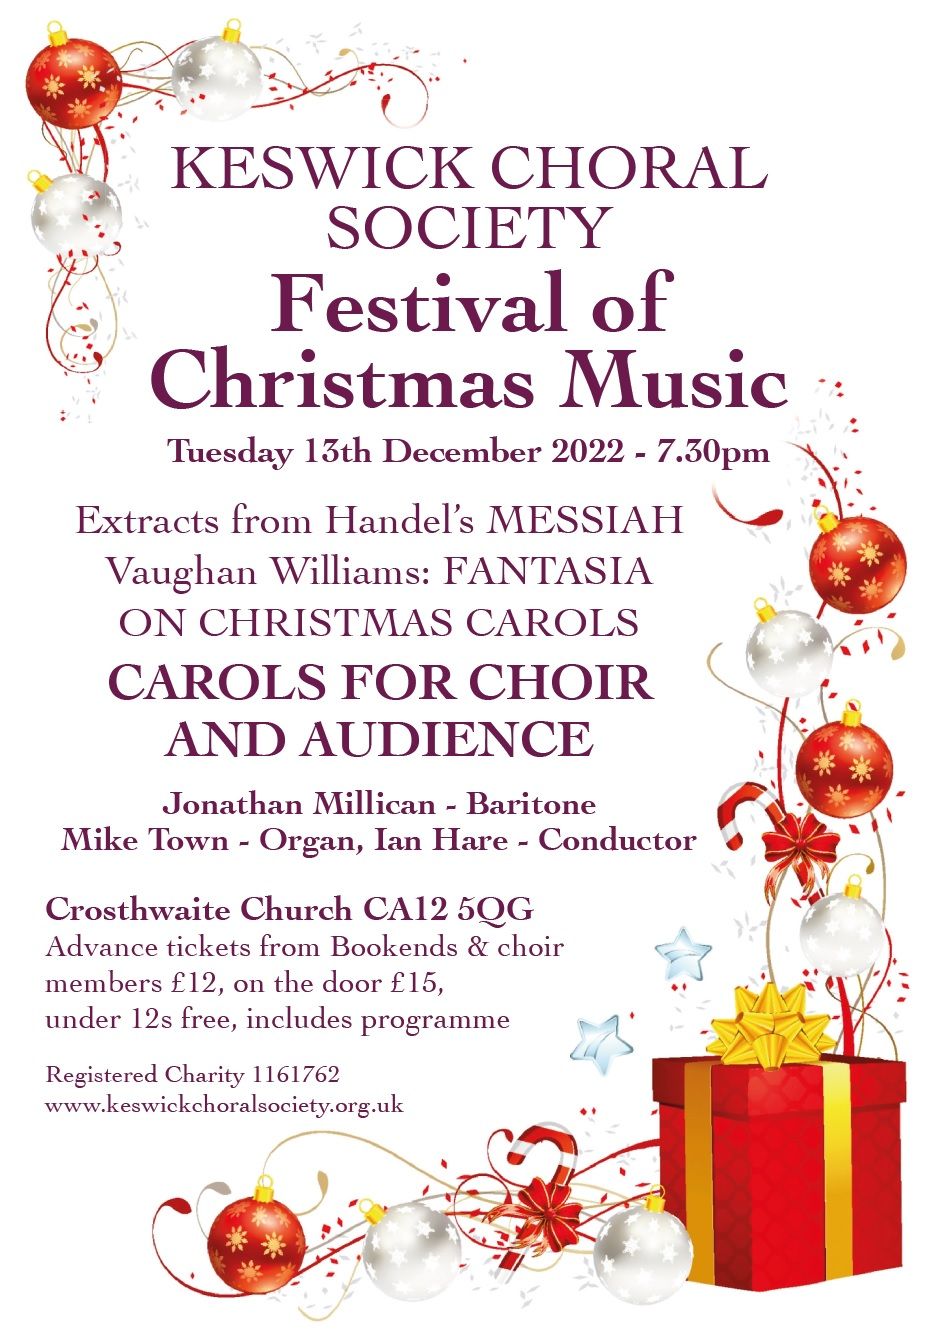 Festival of Christmas Music and Readings: Keswick Choral Society